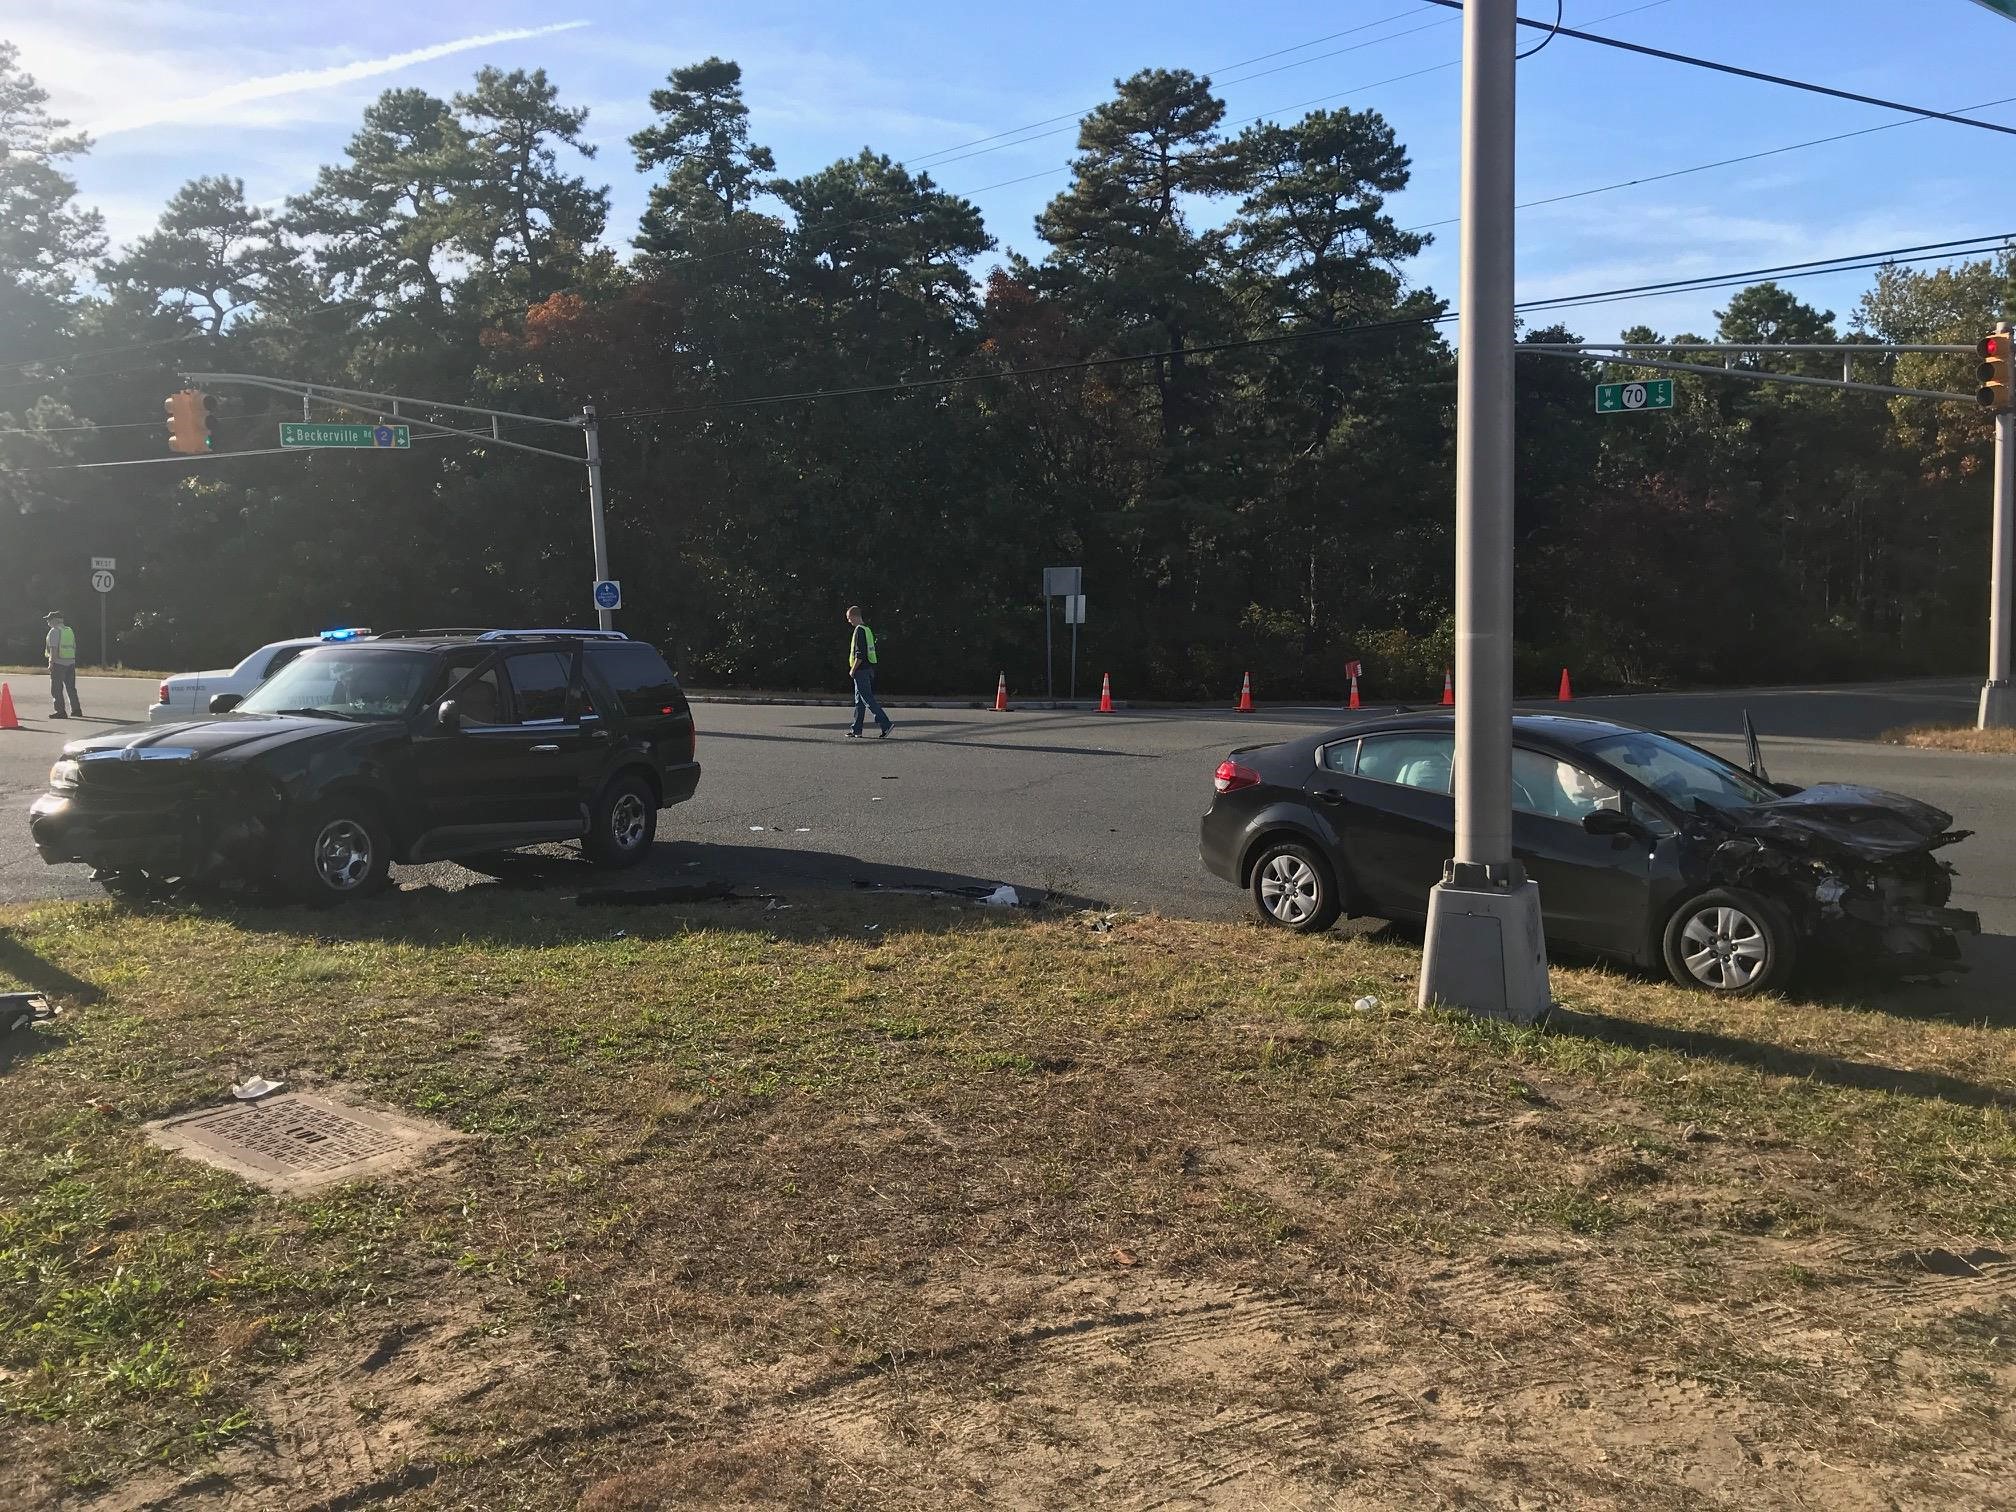 The scene of a crash which injured a Toms River woman, Oct. 2017. (Photo: Manchester Police Department)